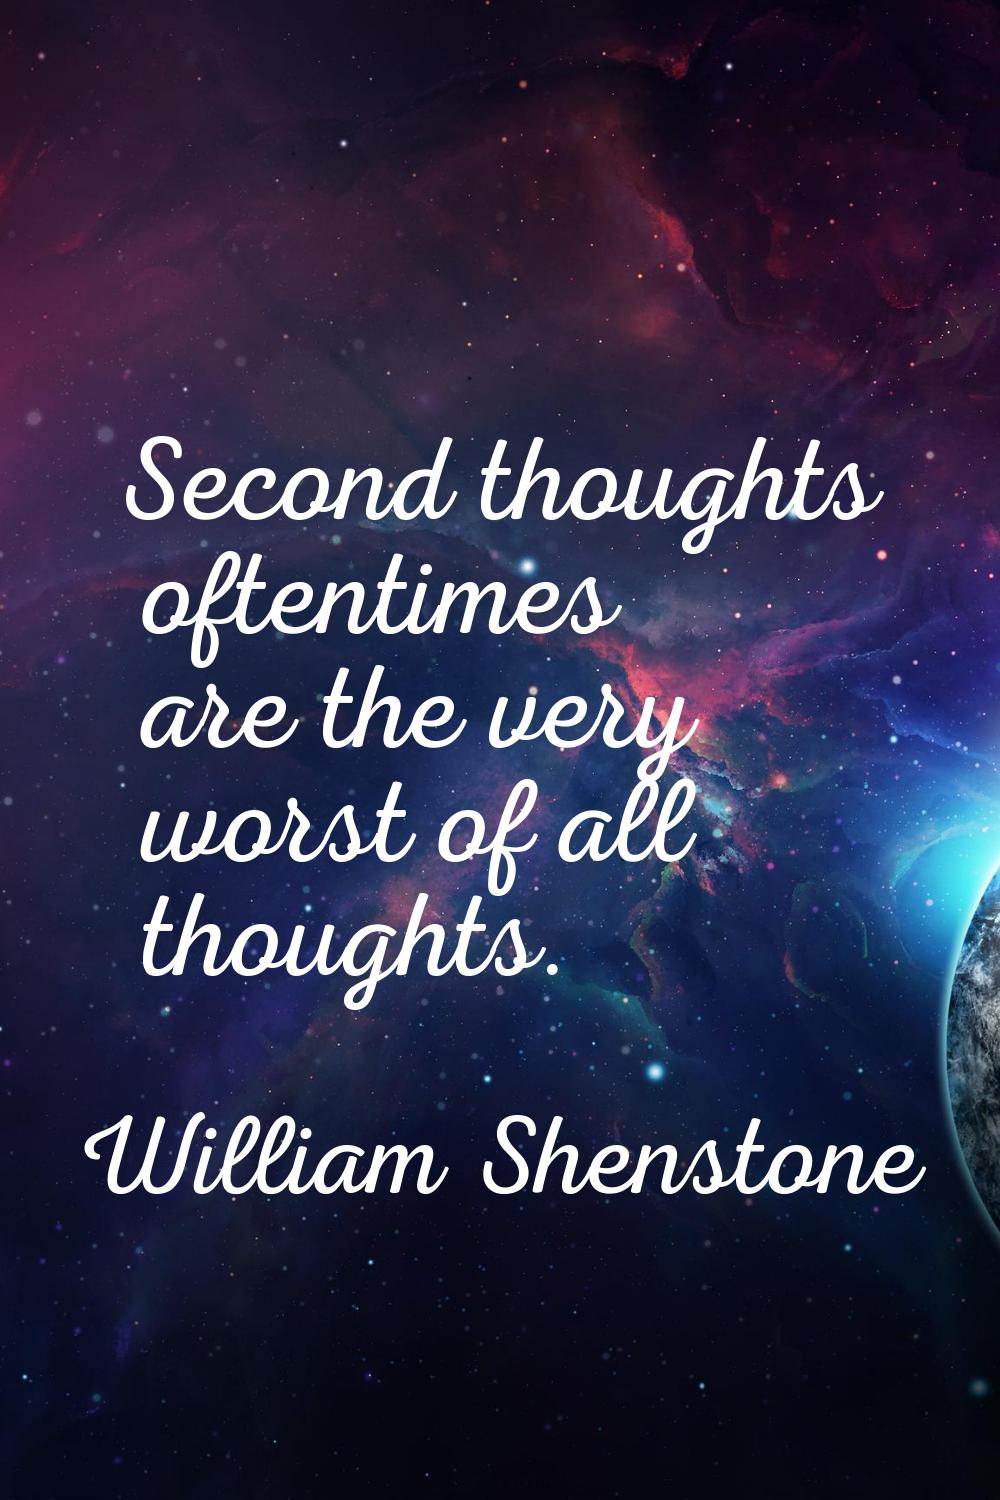 Second thoughts oftentimes are the very worst of all thoughts.